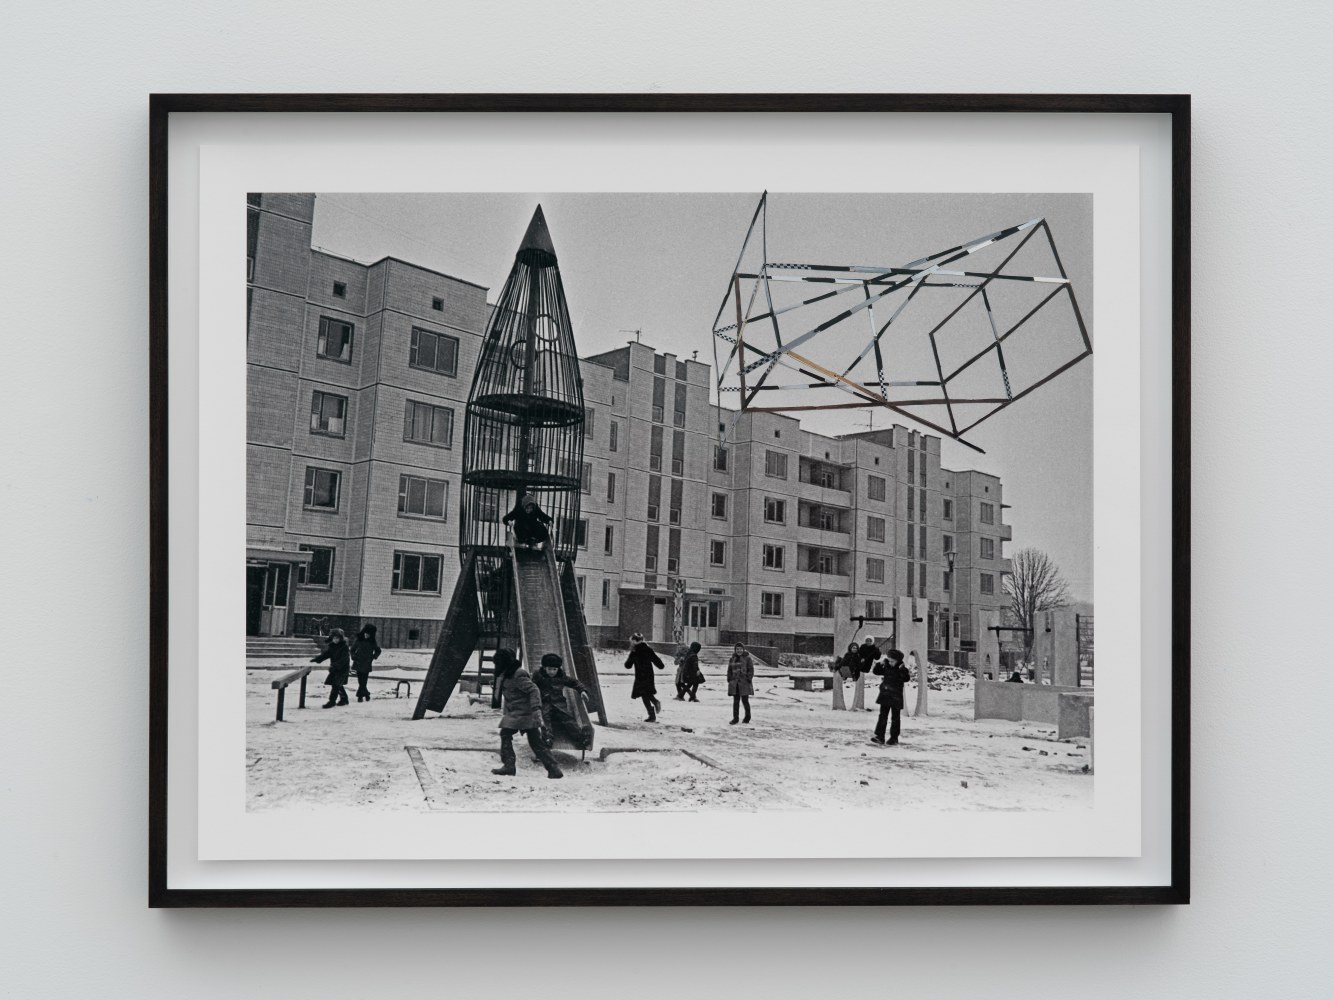 Jane &amp;amp; Louise Wilson

Imperial Measure 16 (Atomgrad, Ukraine)

2014

Photo print and collage on Hahnem&amp;uuml;hle paper

13 x 18 inches (33 x 45.7 cm)

17 1/4 x 22 inches (43.8 x 55.9 cm) framed

unique, series of 4

signed and dated

JLW 215

&amp;nbsp;

INQUIRE